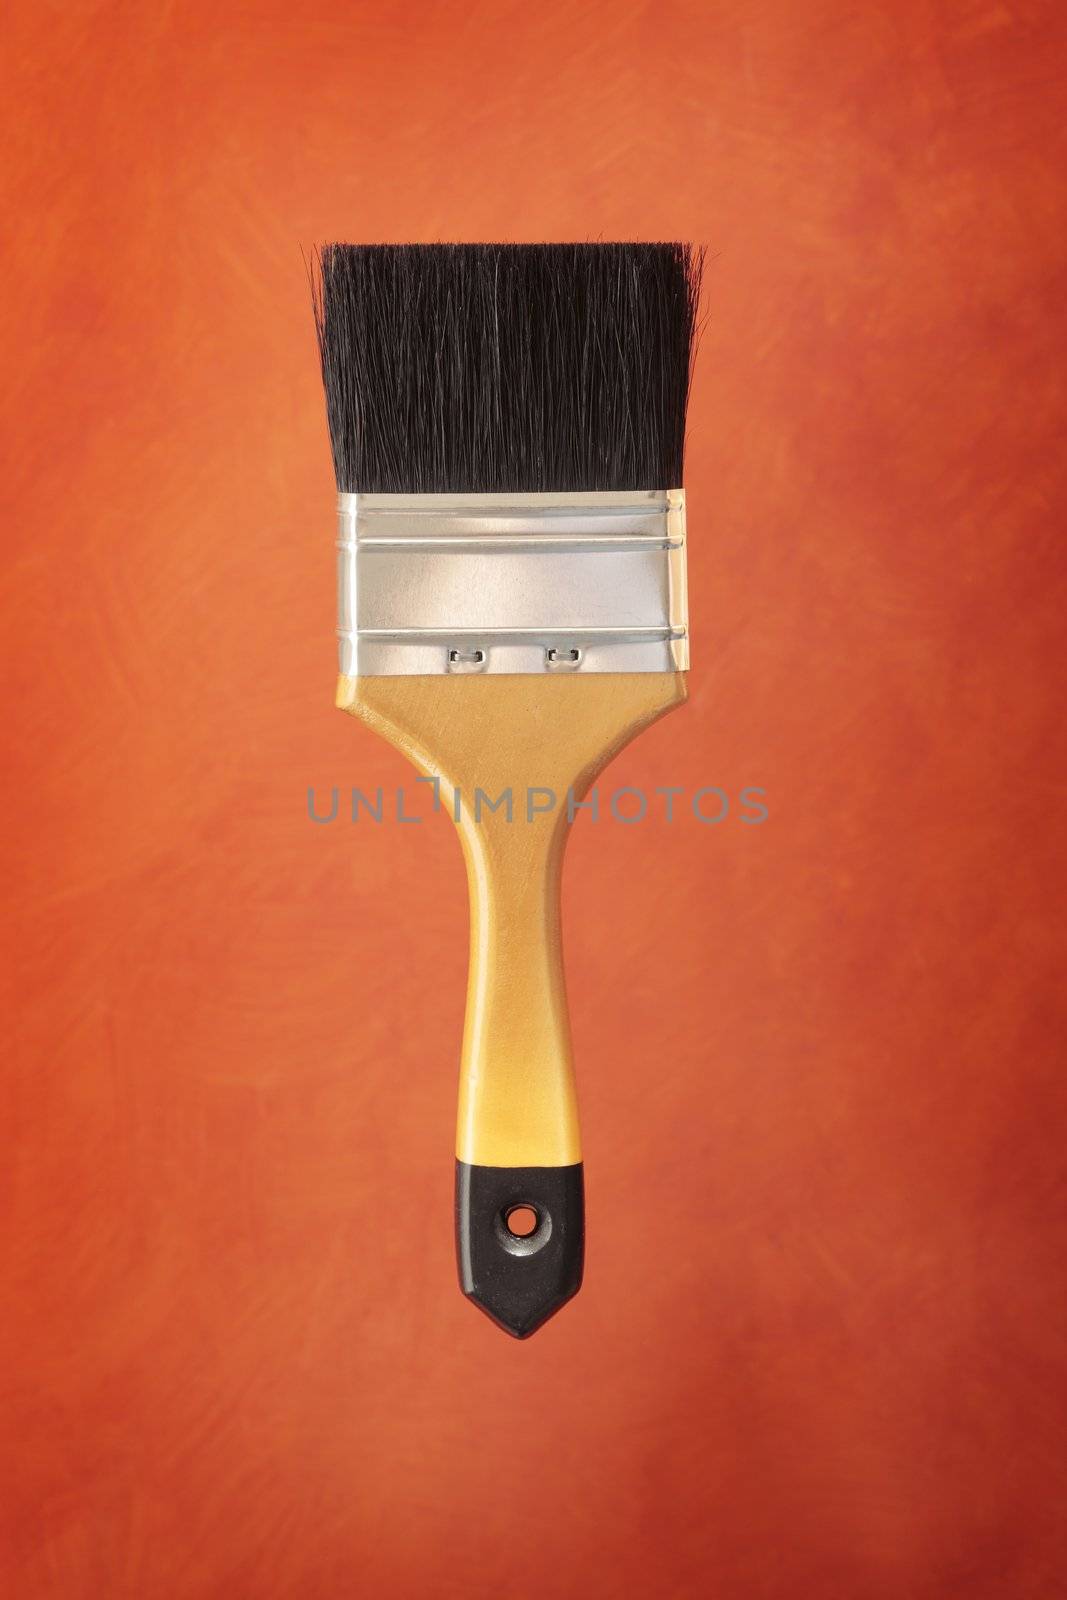 Paint brush by Stocksnapper